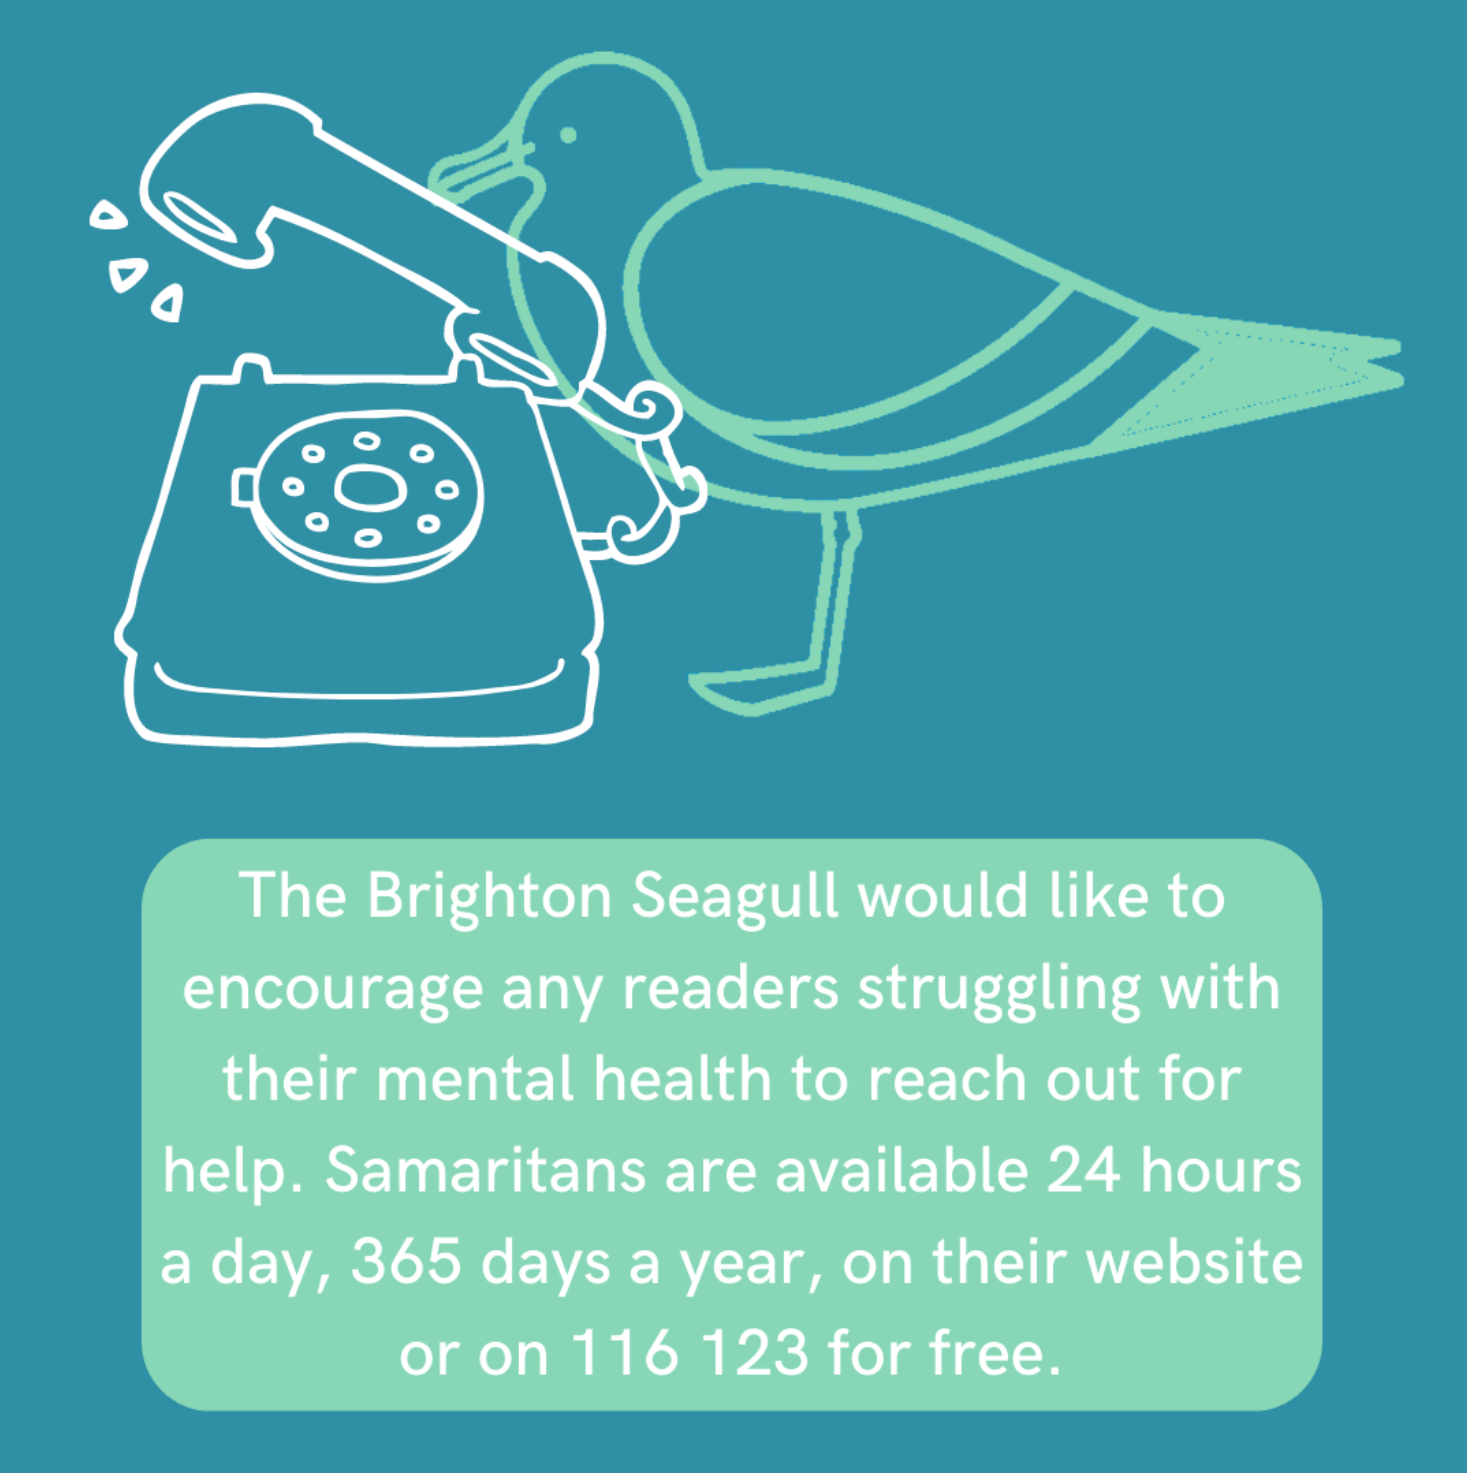 The Brighton Seagull would like to encourage any readers struggling with their mental health to reach out for help. Samaritans are available 24 hours a day, 365 days a year, on their website or on 116 123 for free.